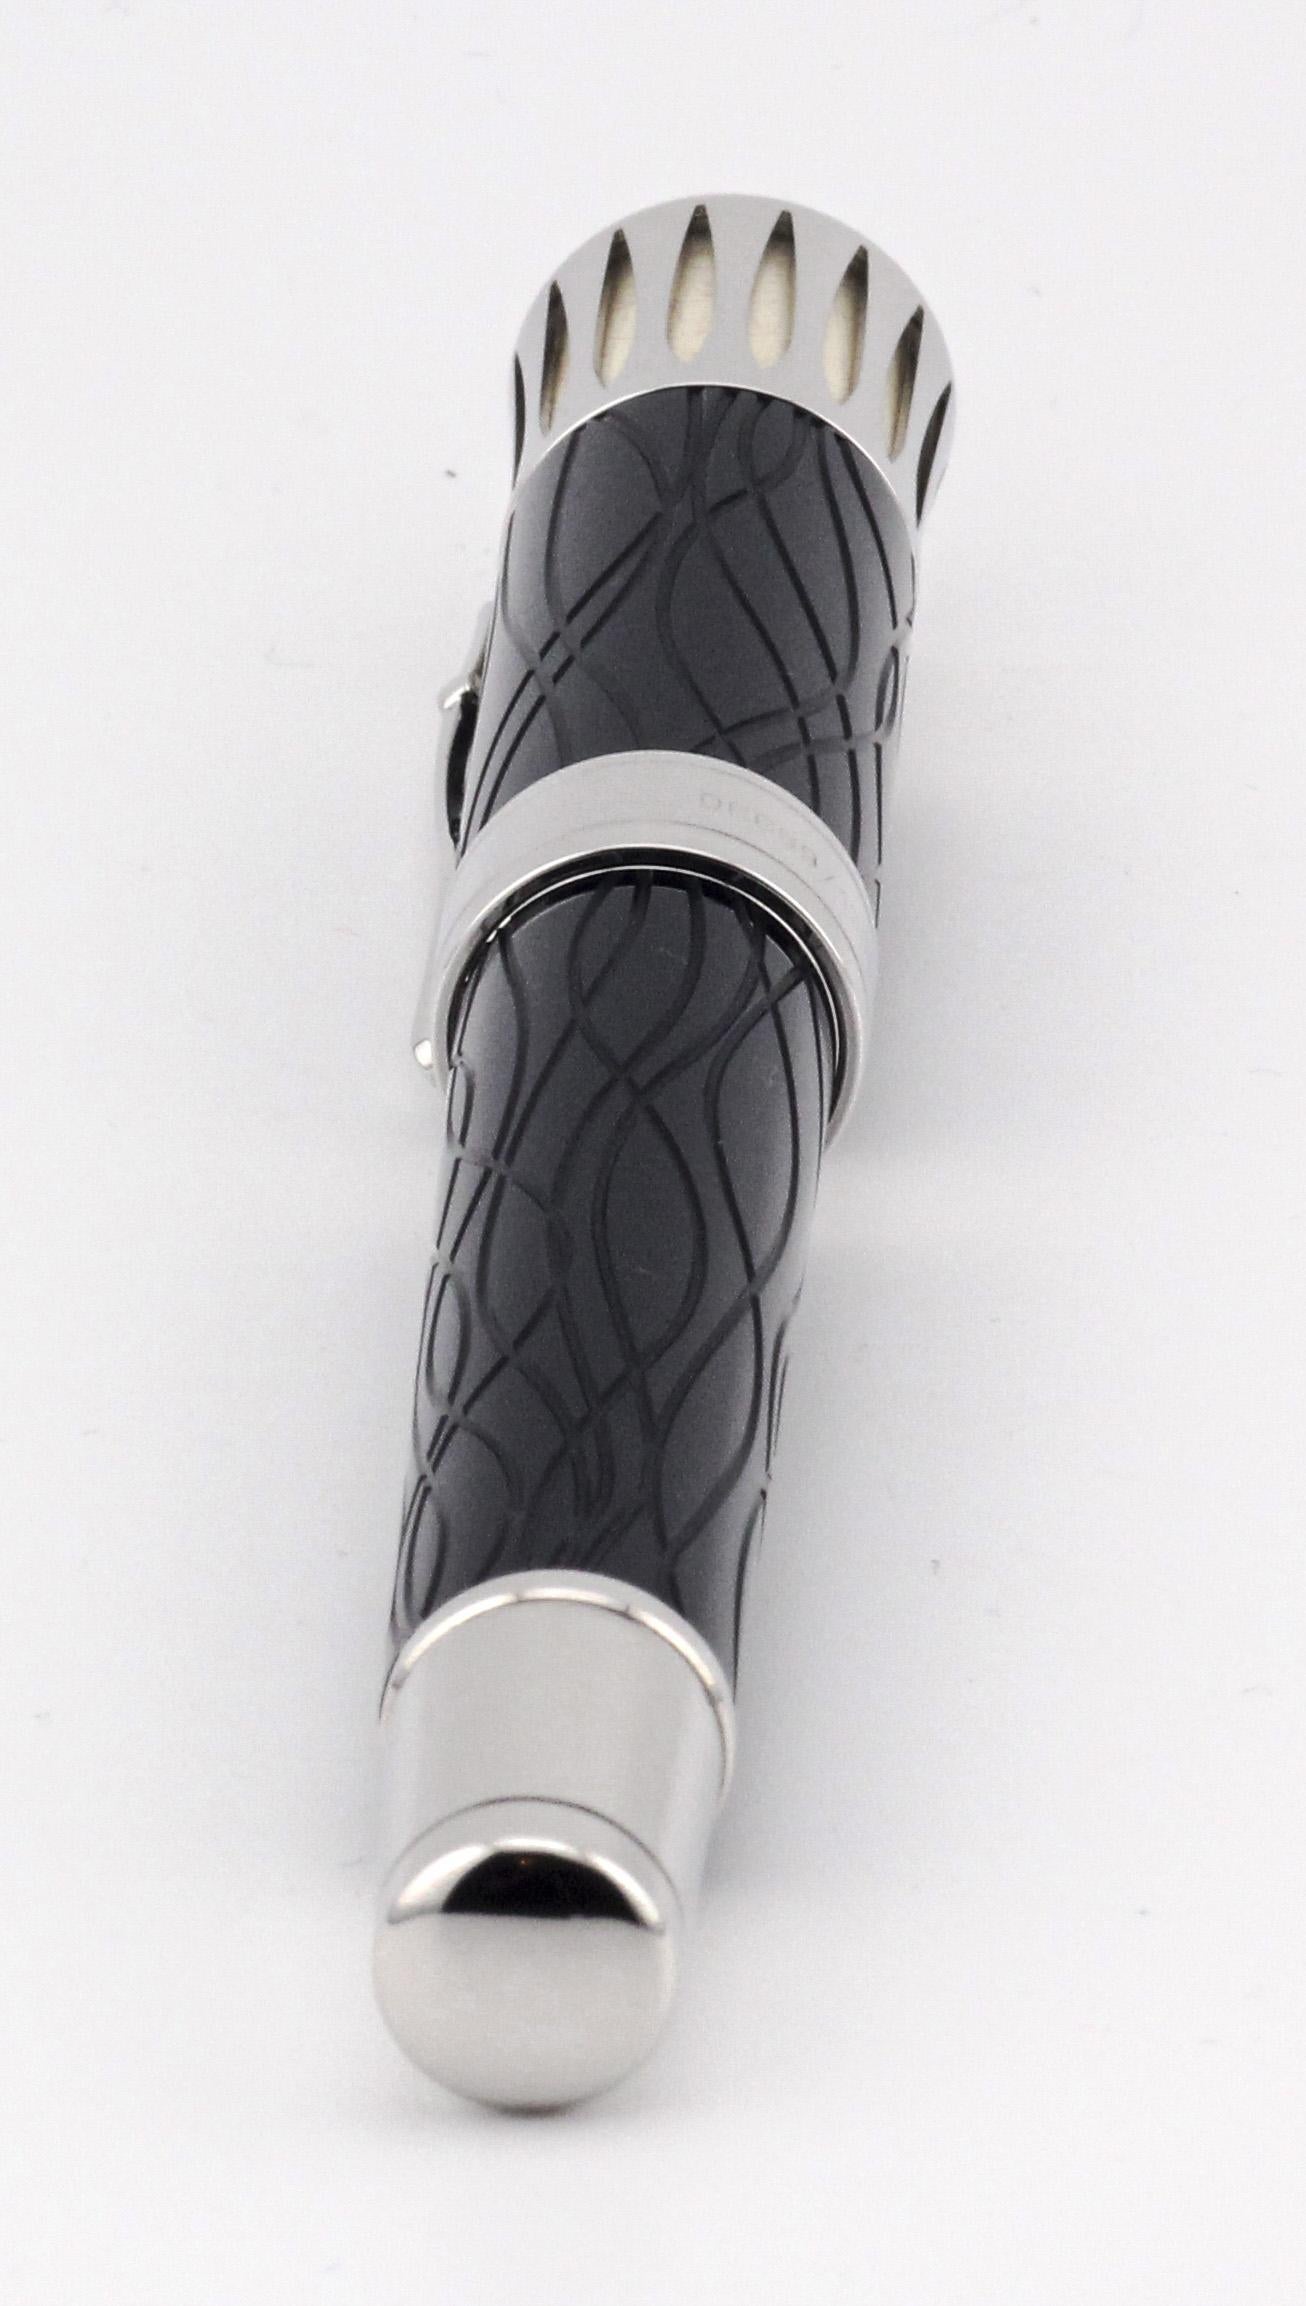 The MONTBLANC Writers Edition Mark Twain Fountain Pen Limited Edition is a distinguished tribute to the iconic American author and humorist, Samuel Langhorne Clemens, famously known as Mark Twain. Imbued with the spirit of Twain's literary